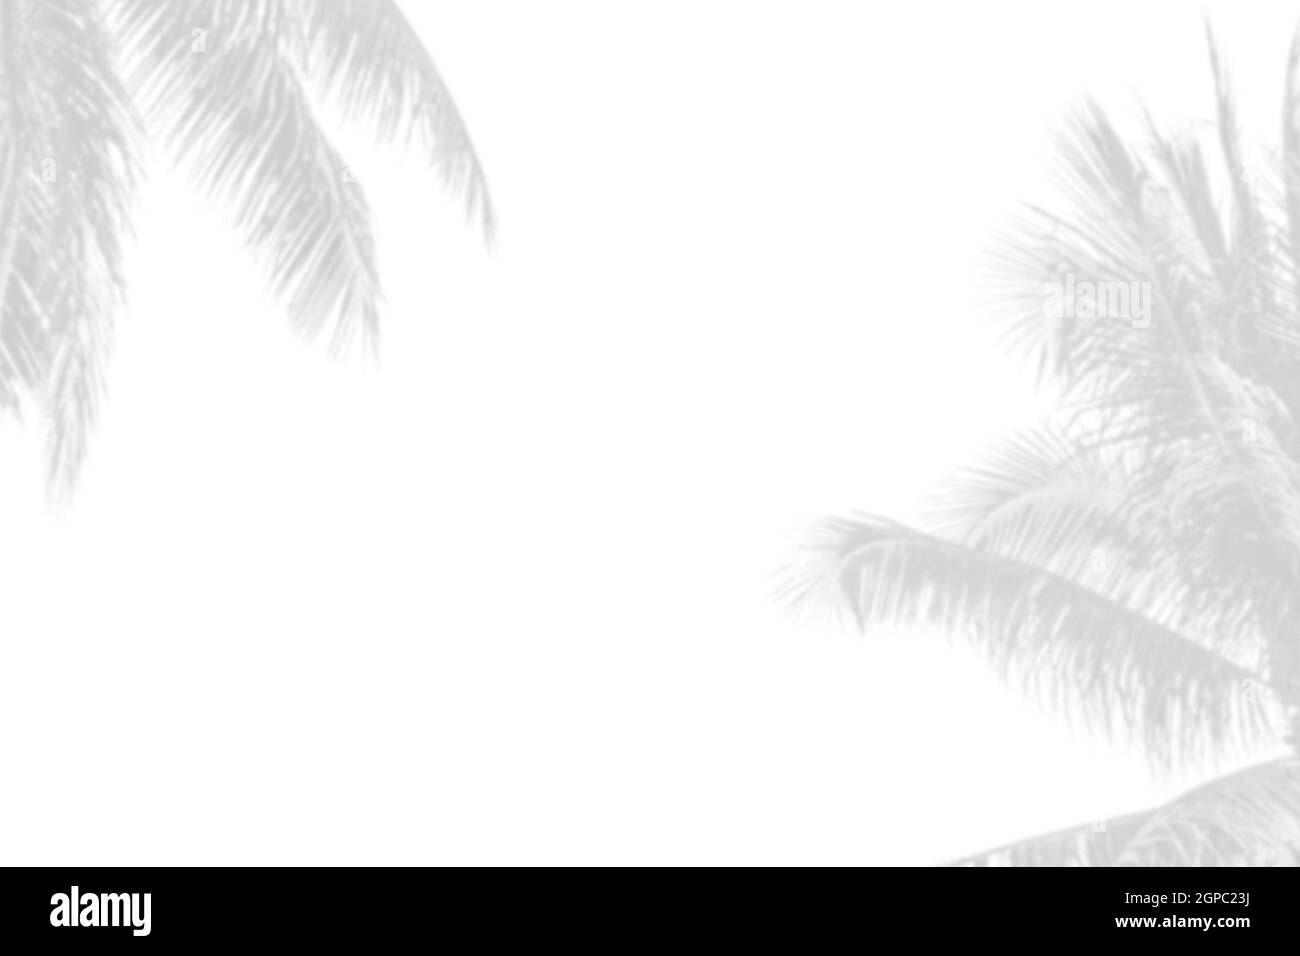 Gray shadow of nature palm leaves on white background. Abstract monochrome of coconut palm leaf. Stock Photo